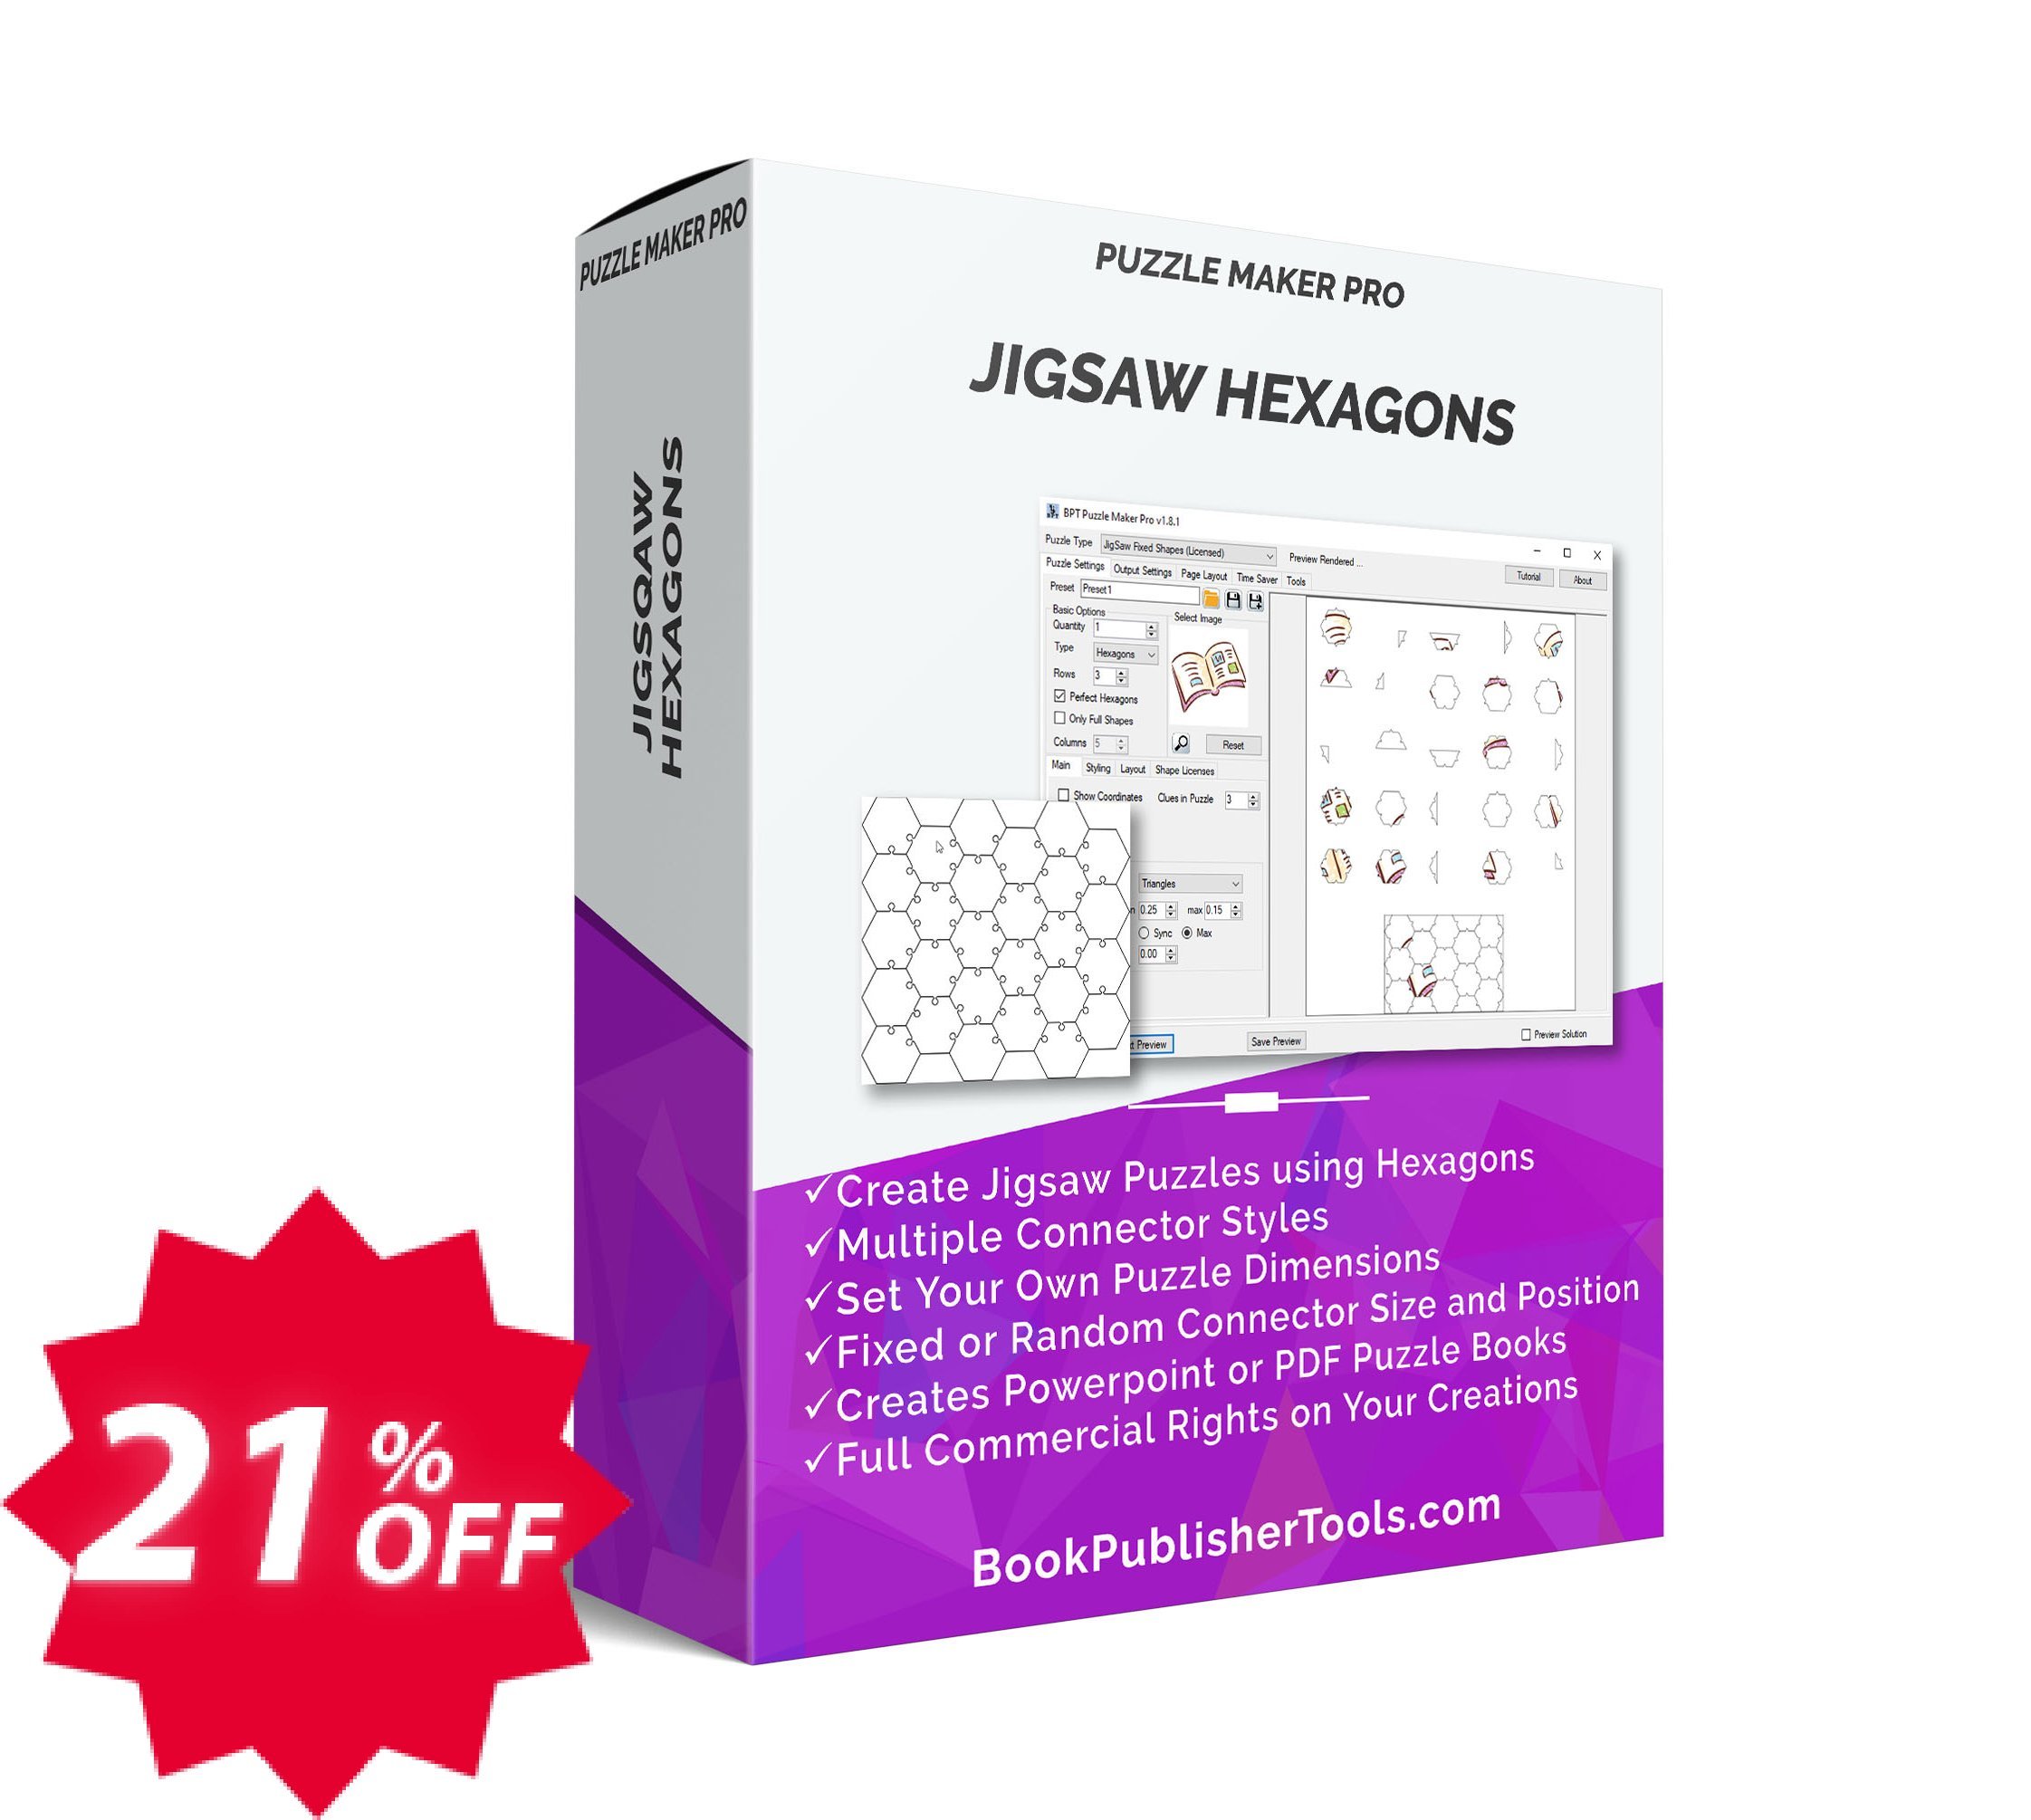 Puzzle Maker Pro - JigSaw Hexagons Coupon code 21% discount 